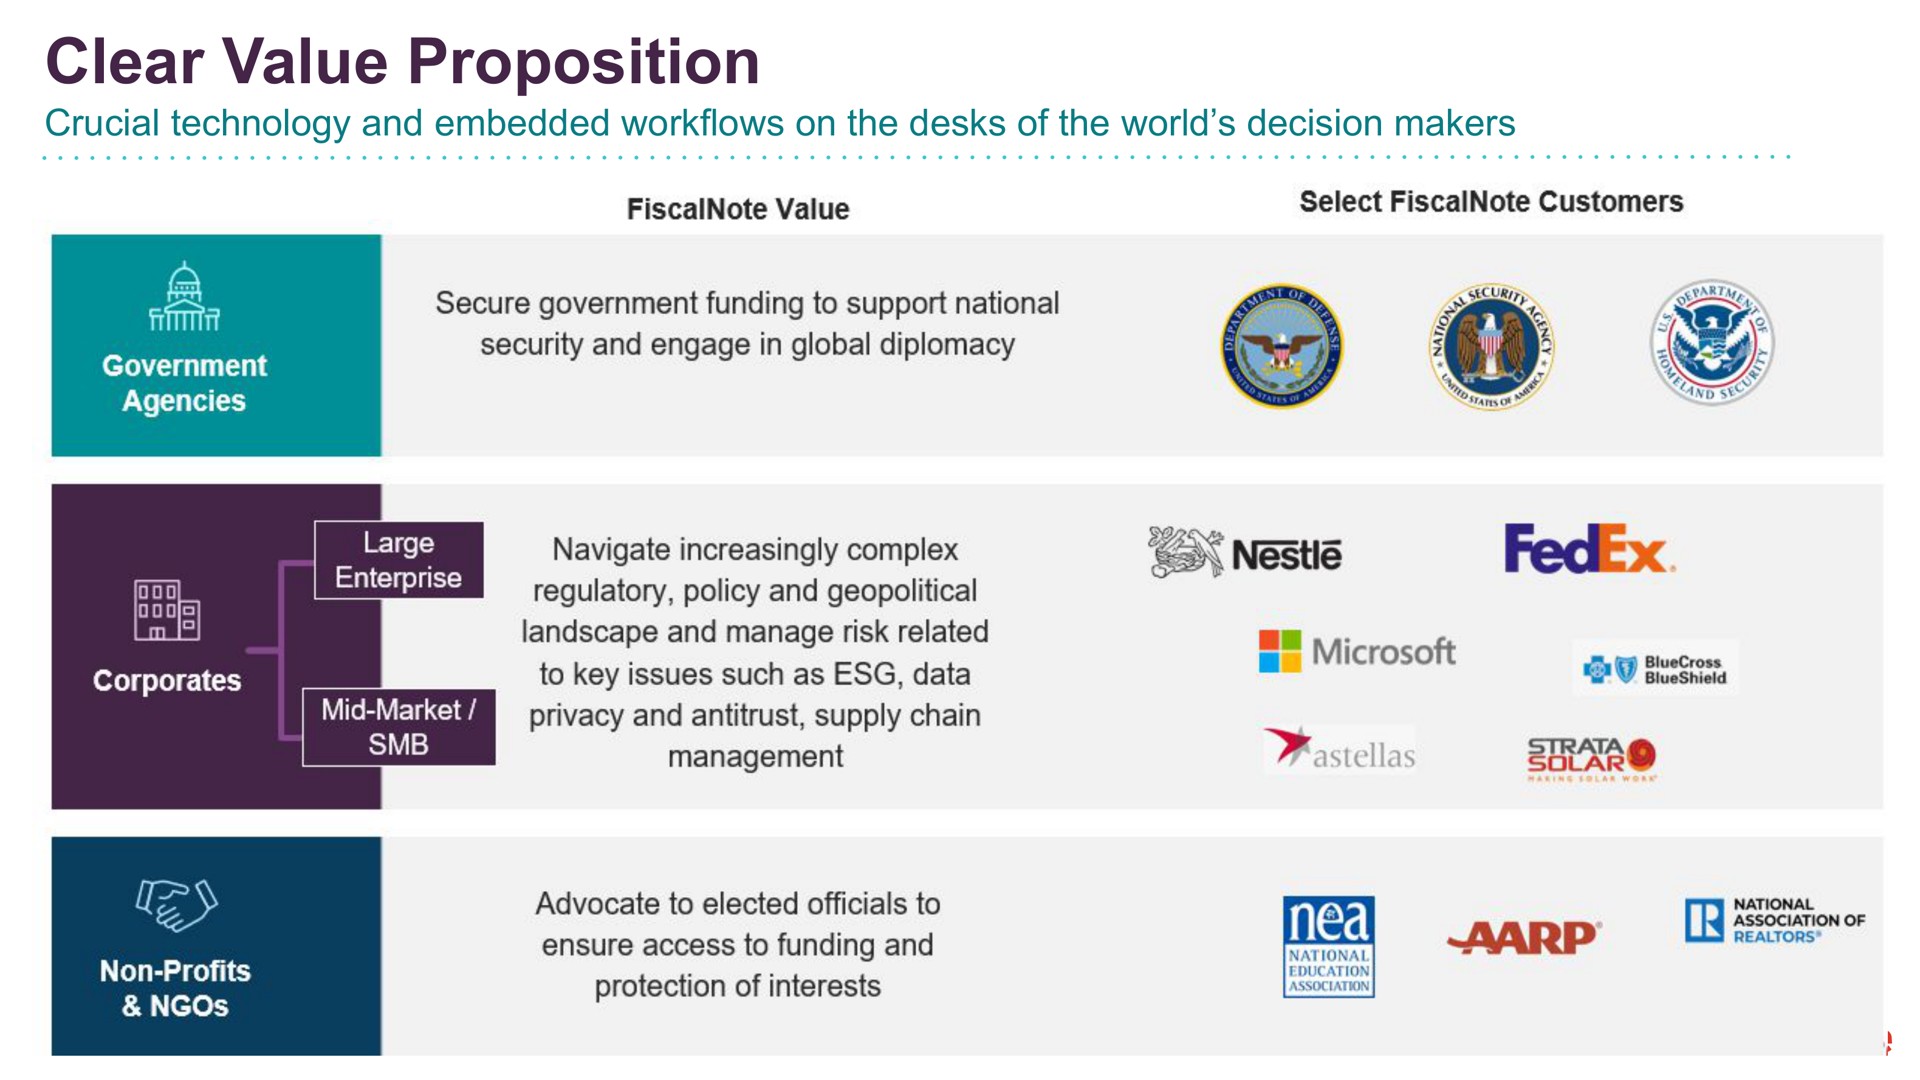 clear value proposition crucial technology and embedded on the desks of the world decision makers strata | FiscalNote